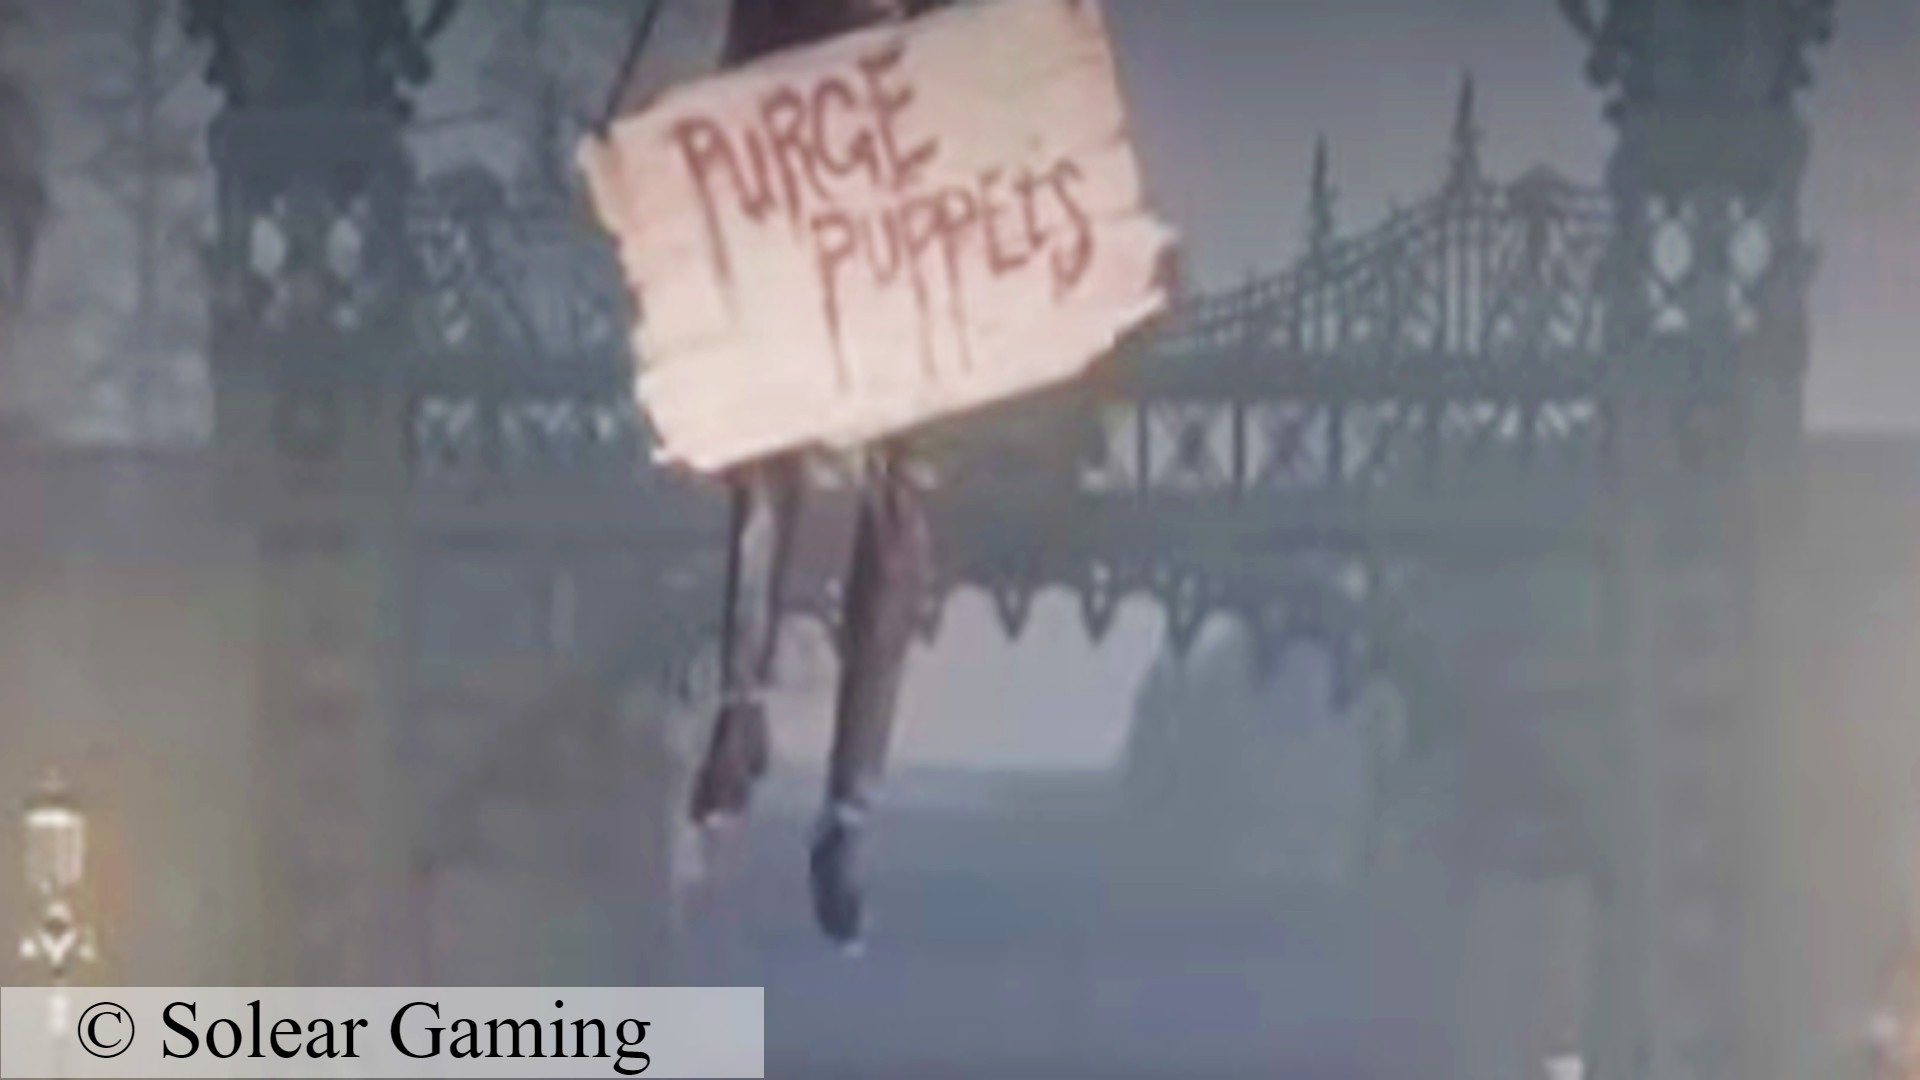 Lies of P cut content: A marionette from soulslike RPG game Lies of P wearing a sign that says purge puppets